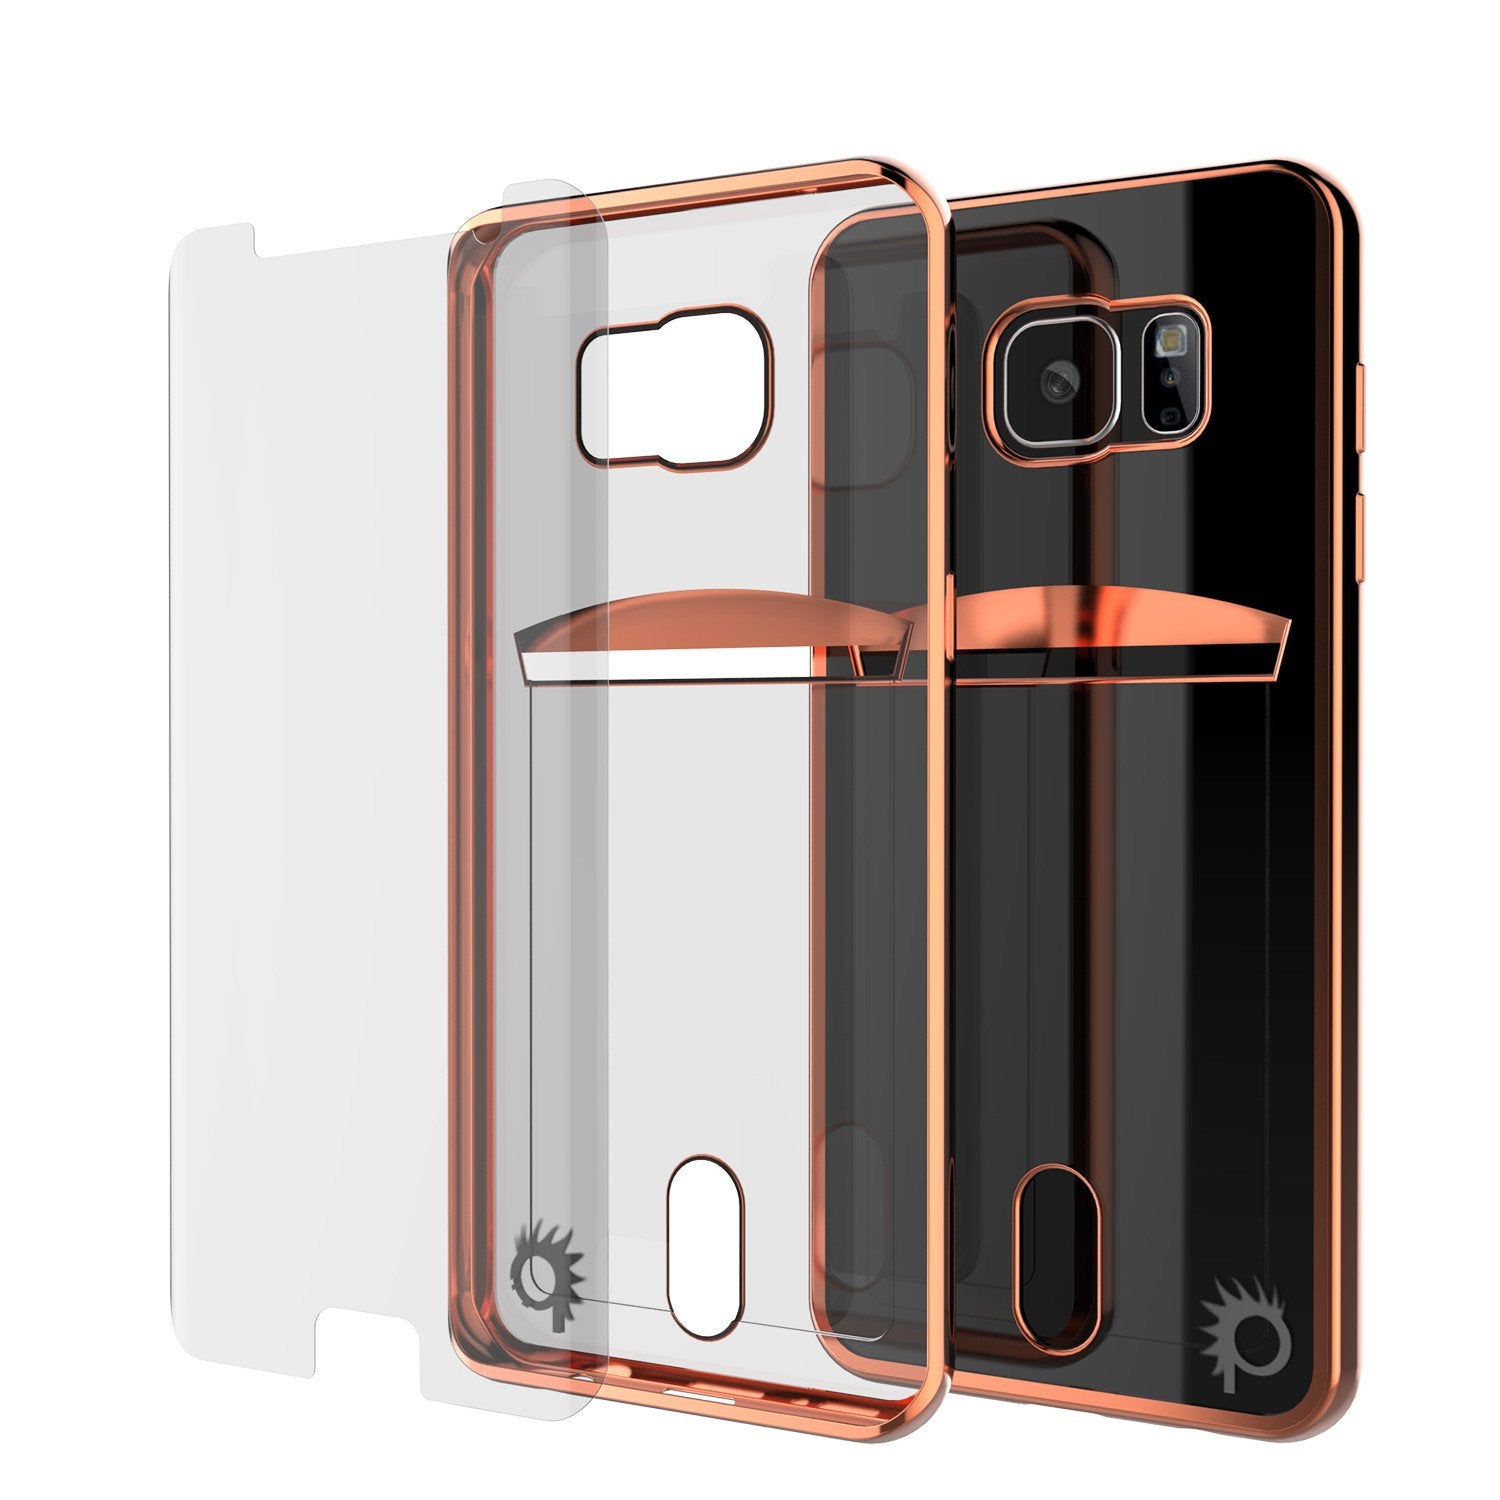 Galaxy S7 EDGE Case, PUNKCASE® LUCID Rose Gold Series | Card Slot | SHIELD Screen Protector